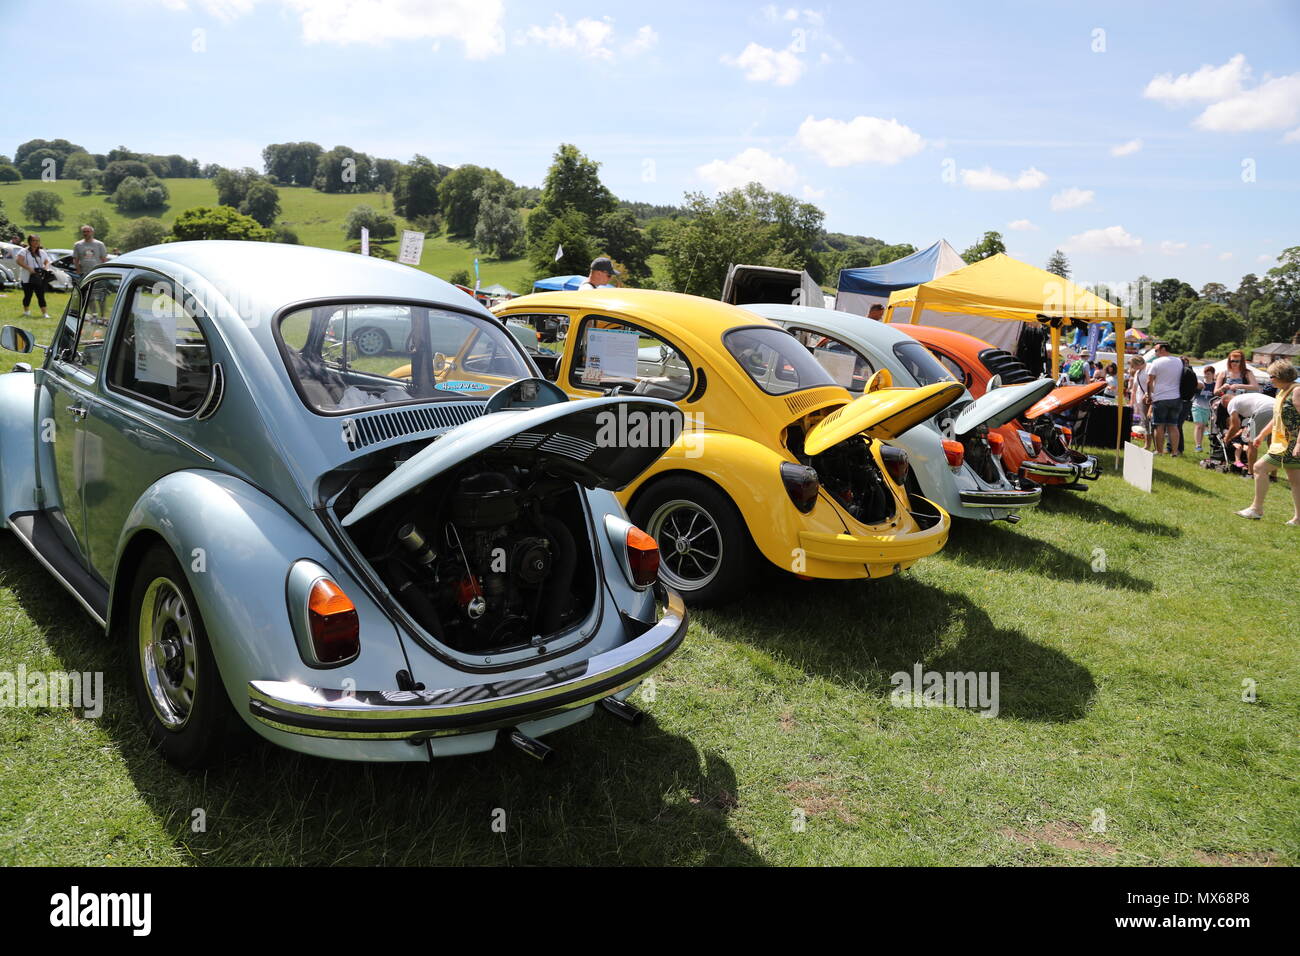 Stonor, Oxfordshire, UK. 3rd Jun, 2018. All types of historic Volkswagen cars and vans were displayed at this years's gathering of their owners. Fans could get close to well-loved vehicles from the German car manufacturer, which created its reputation for durability  and Hippie appeal in the 60s. Beetles lined up. Credit: Uwe Deffner/Alamy Live News Stock Photo